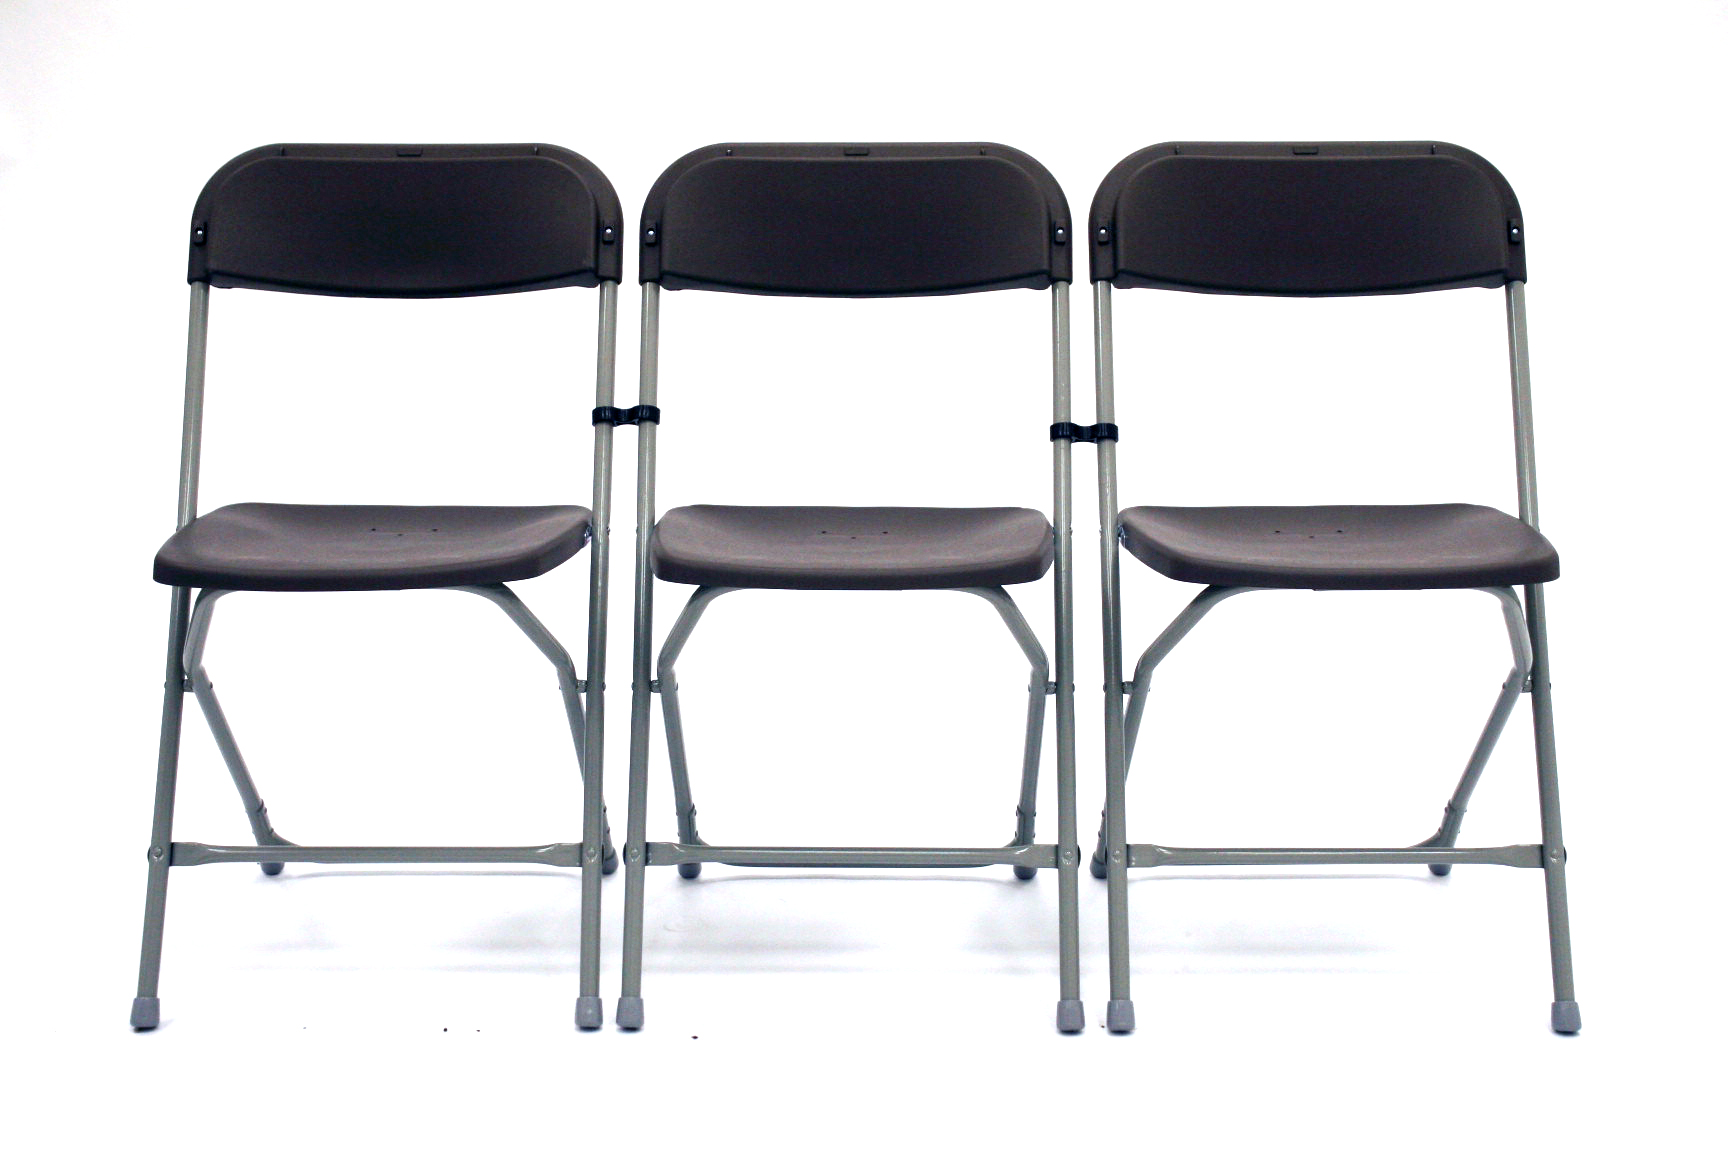 Black plastic linking clip for linking Folding chairs.  - BE Event Hire